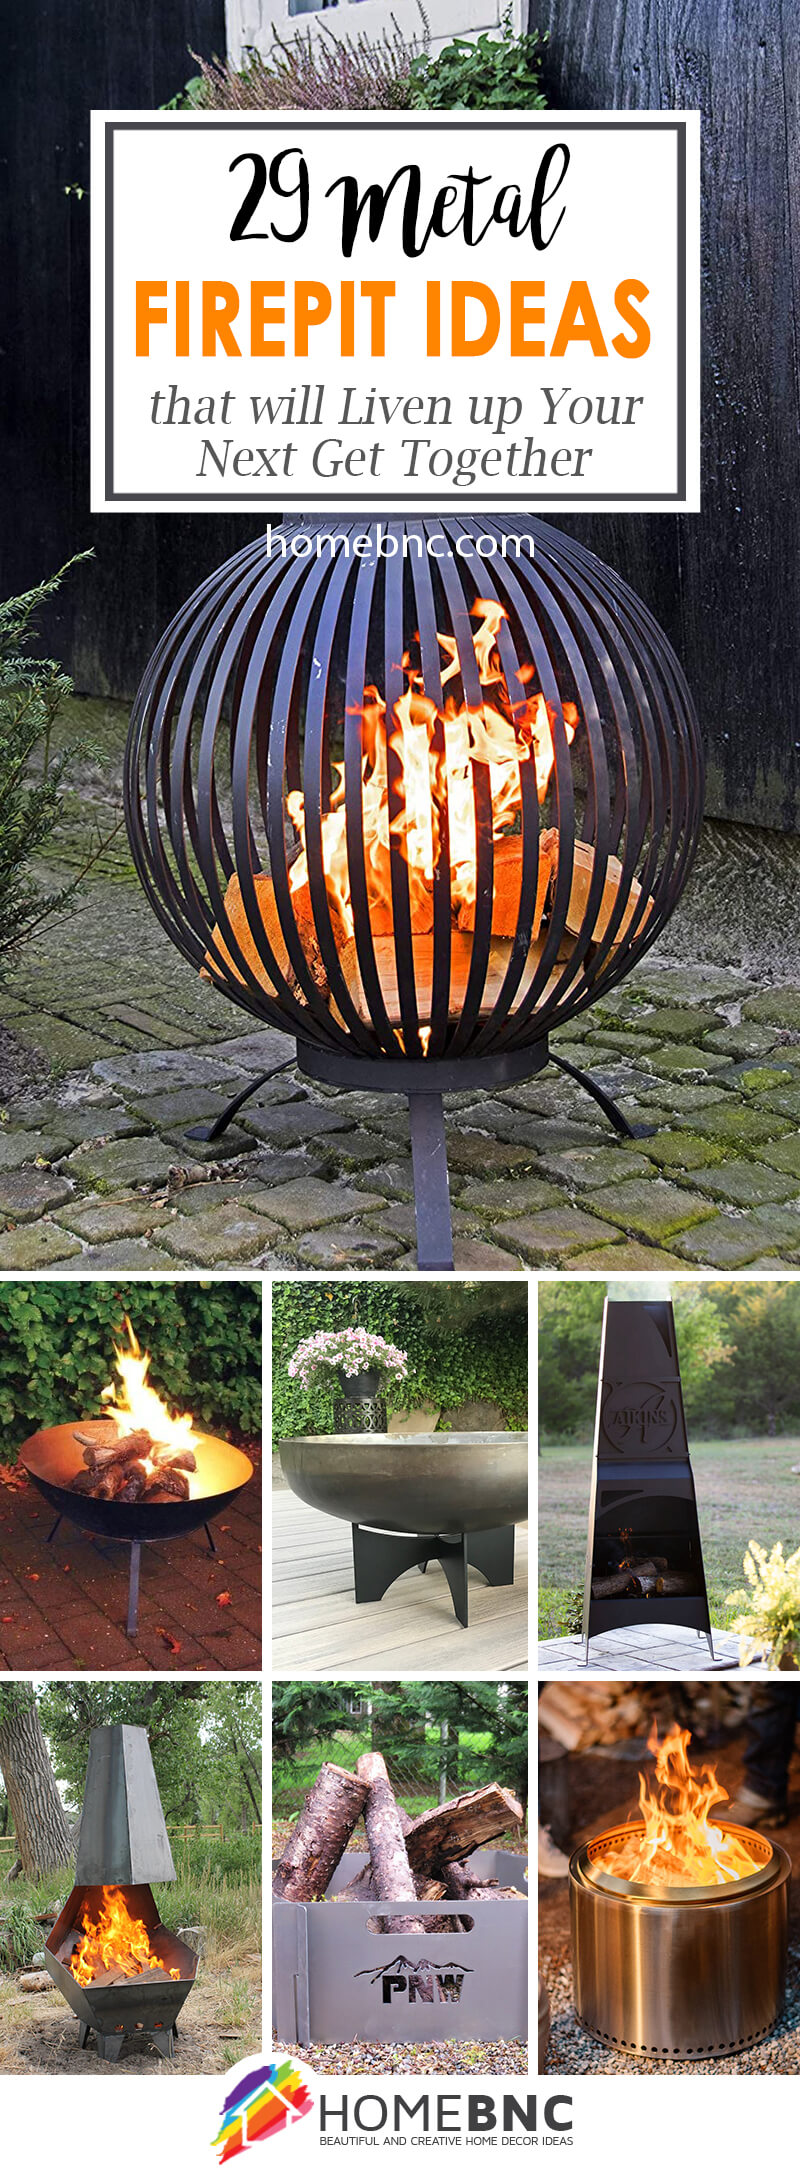 29 Best Metal Fire Pit Ideas To, Fire Pits Made Out Of Propane Tanks